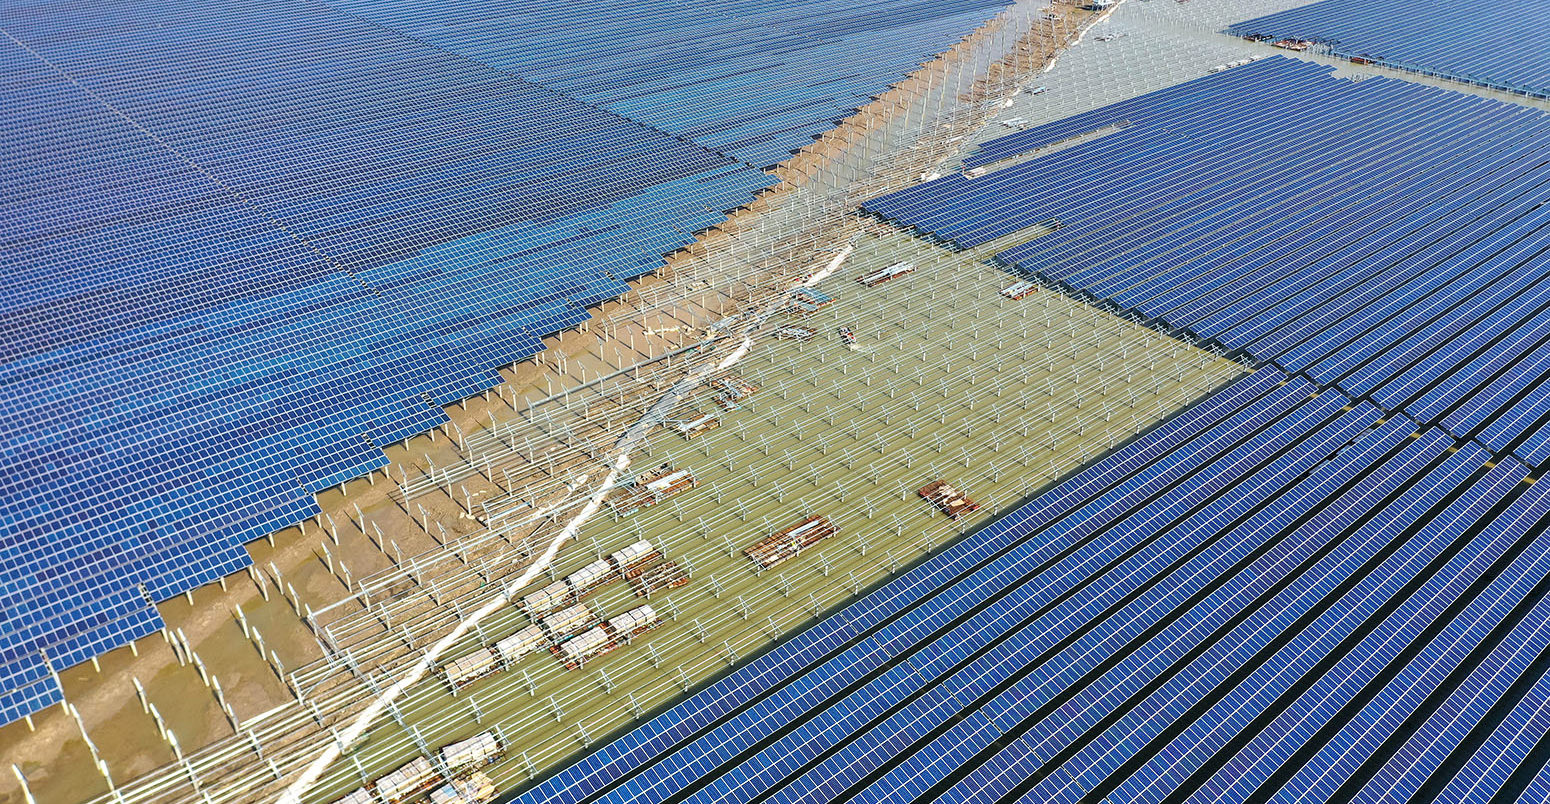 Aerial view of solar panels at a power station in Ningbo City, Zhejiang, China. Credit: Cynthia Lee / Alamy Stock Photo. 2AE7EG6